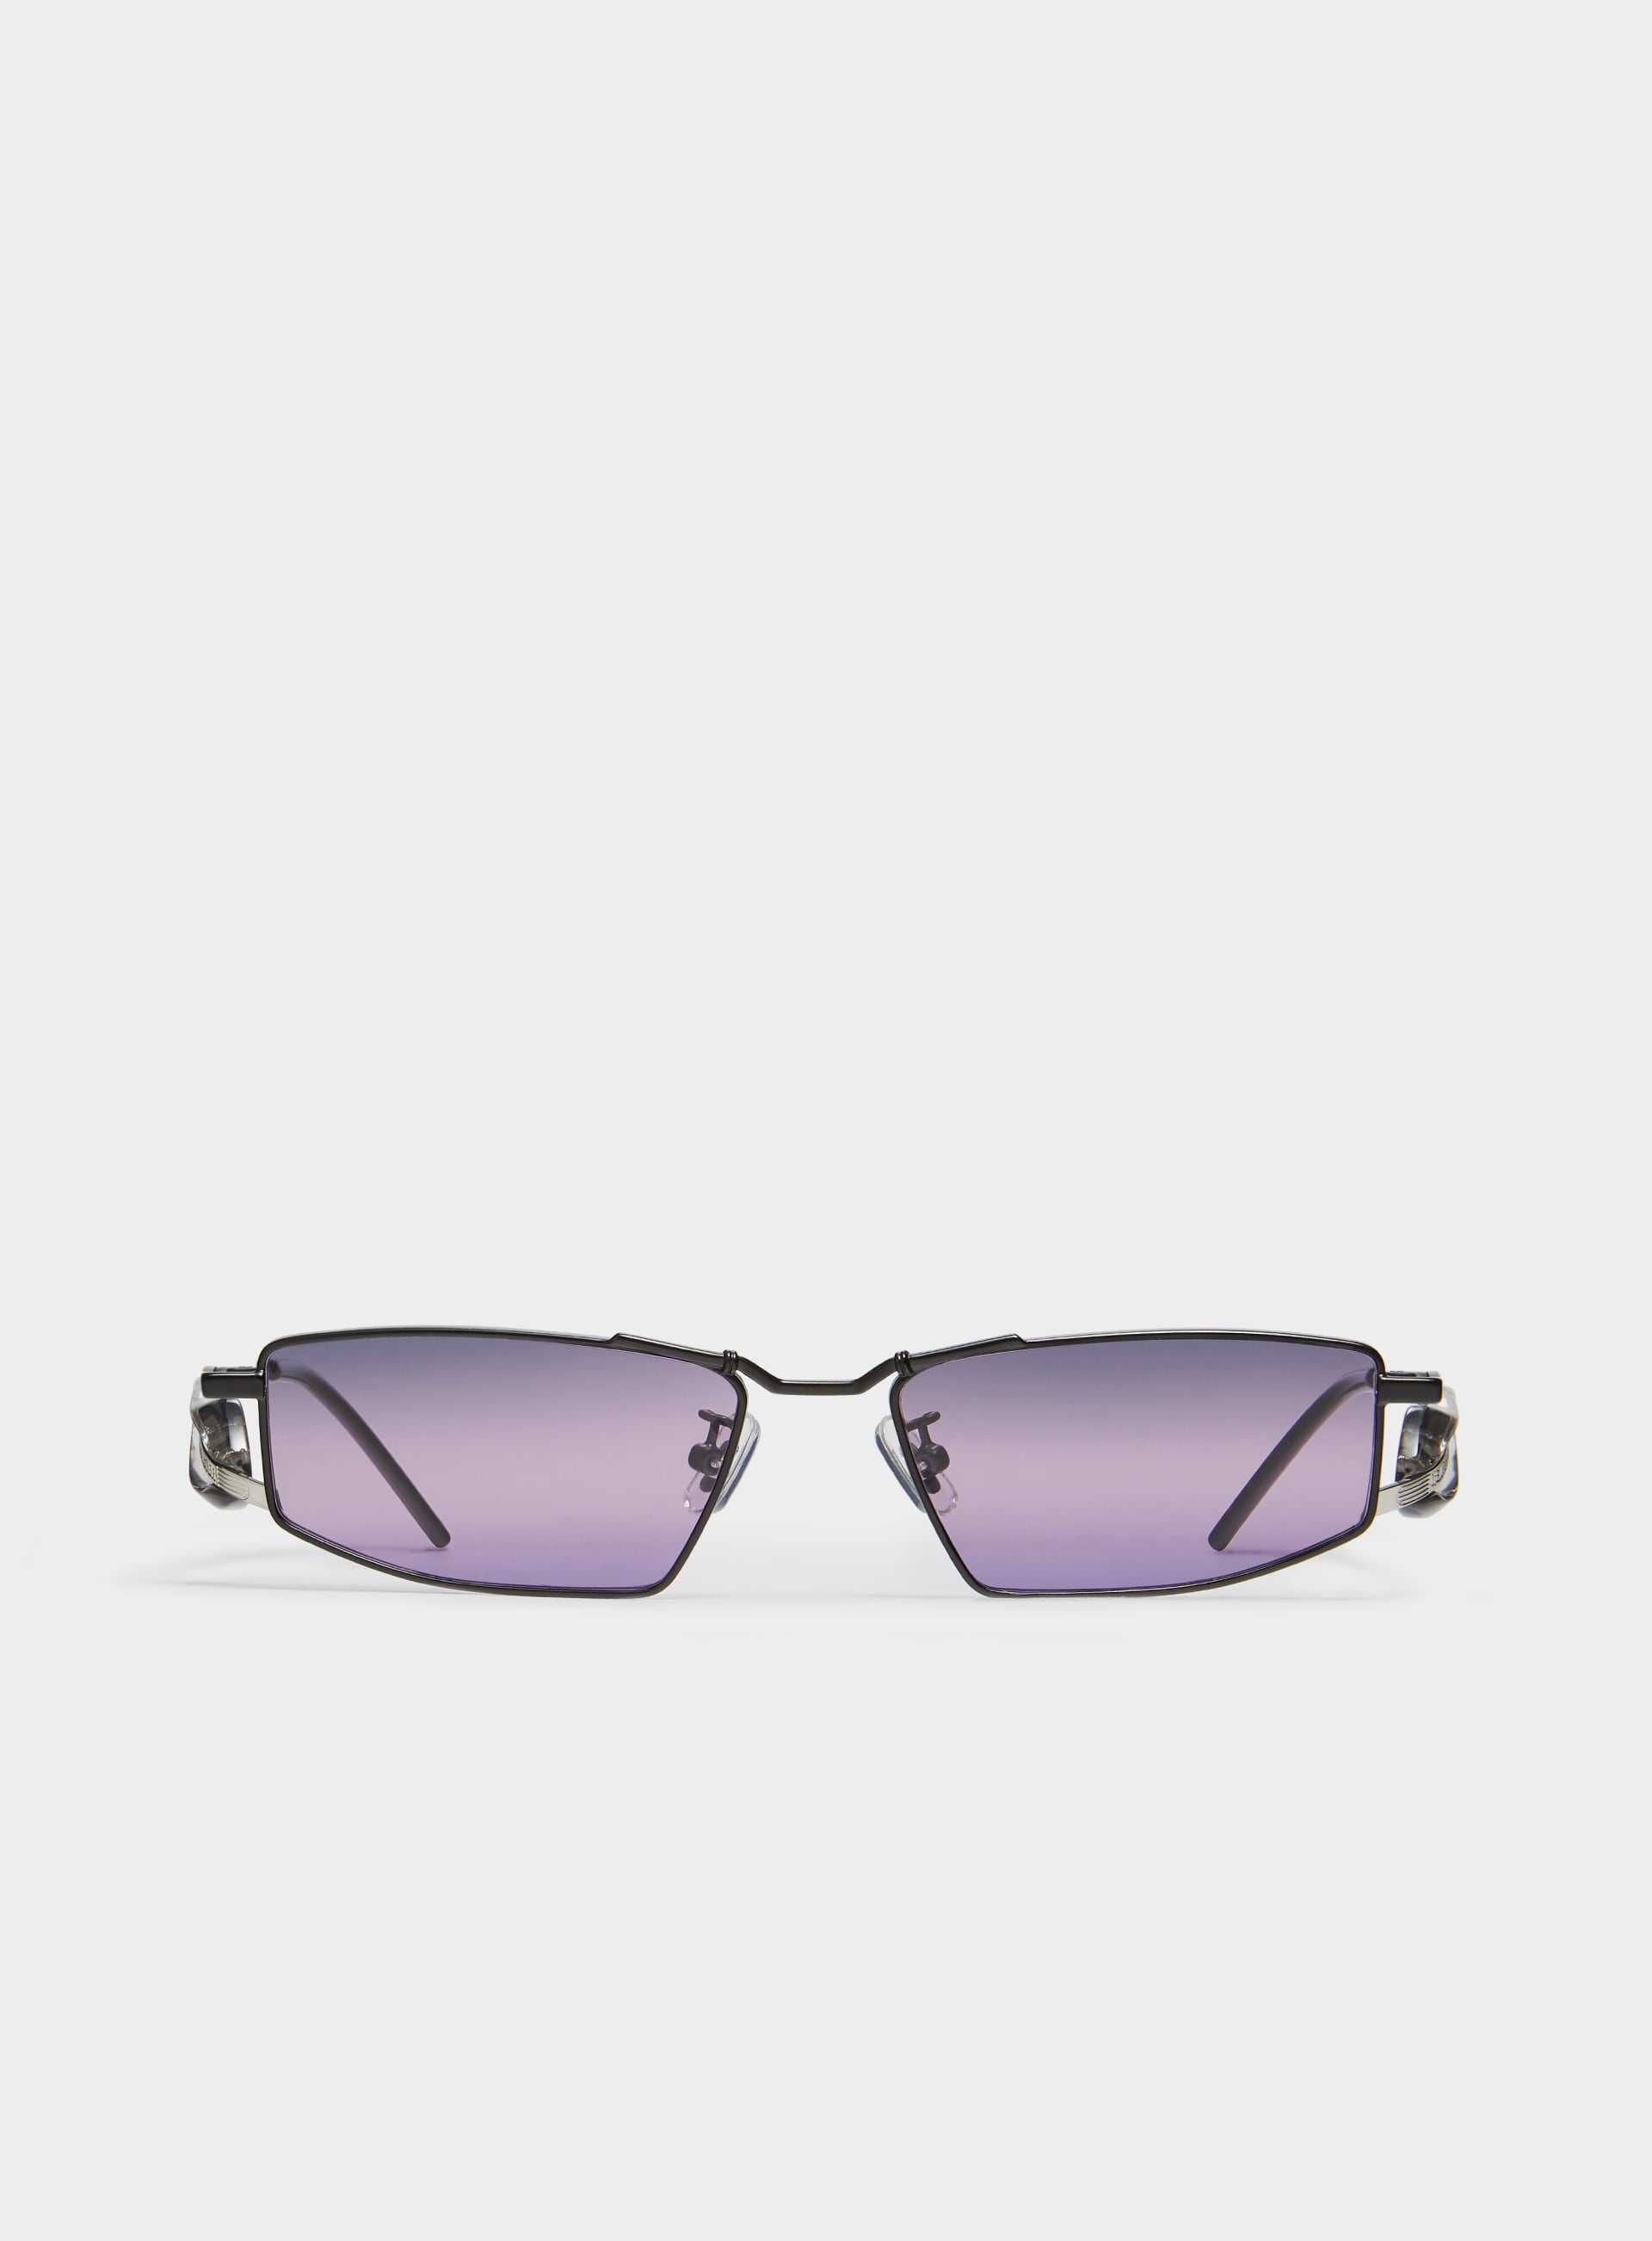 2,061 Sunglasses Cloudy Day Images, Stock Photos & Vectors | Shutterstock